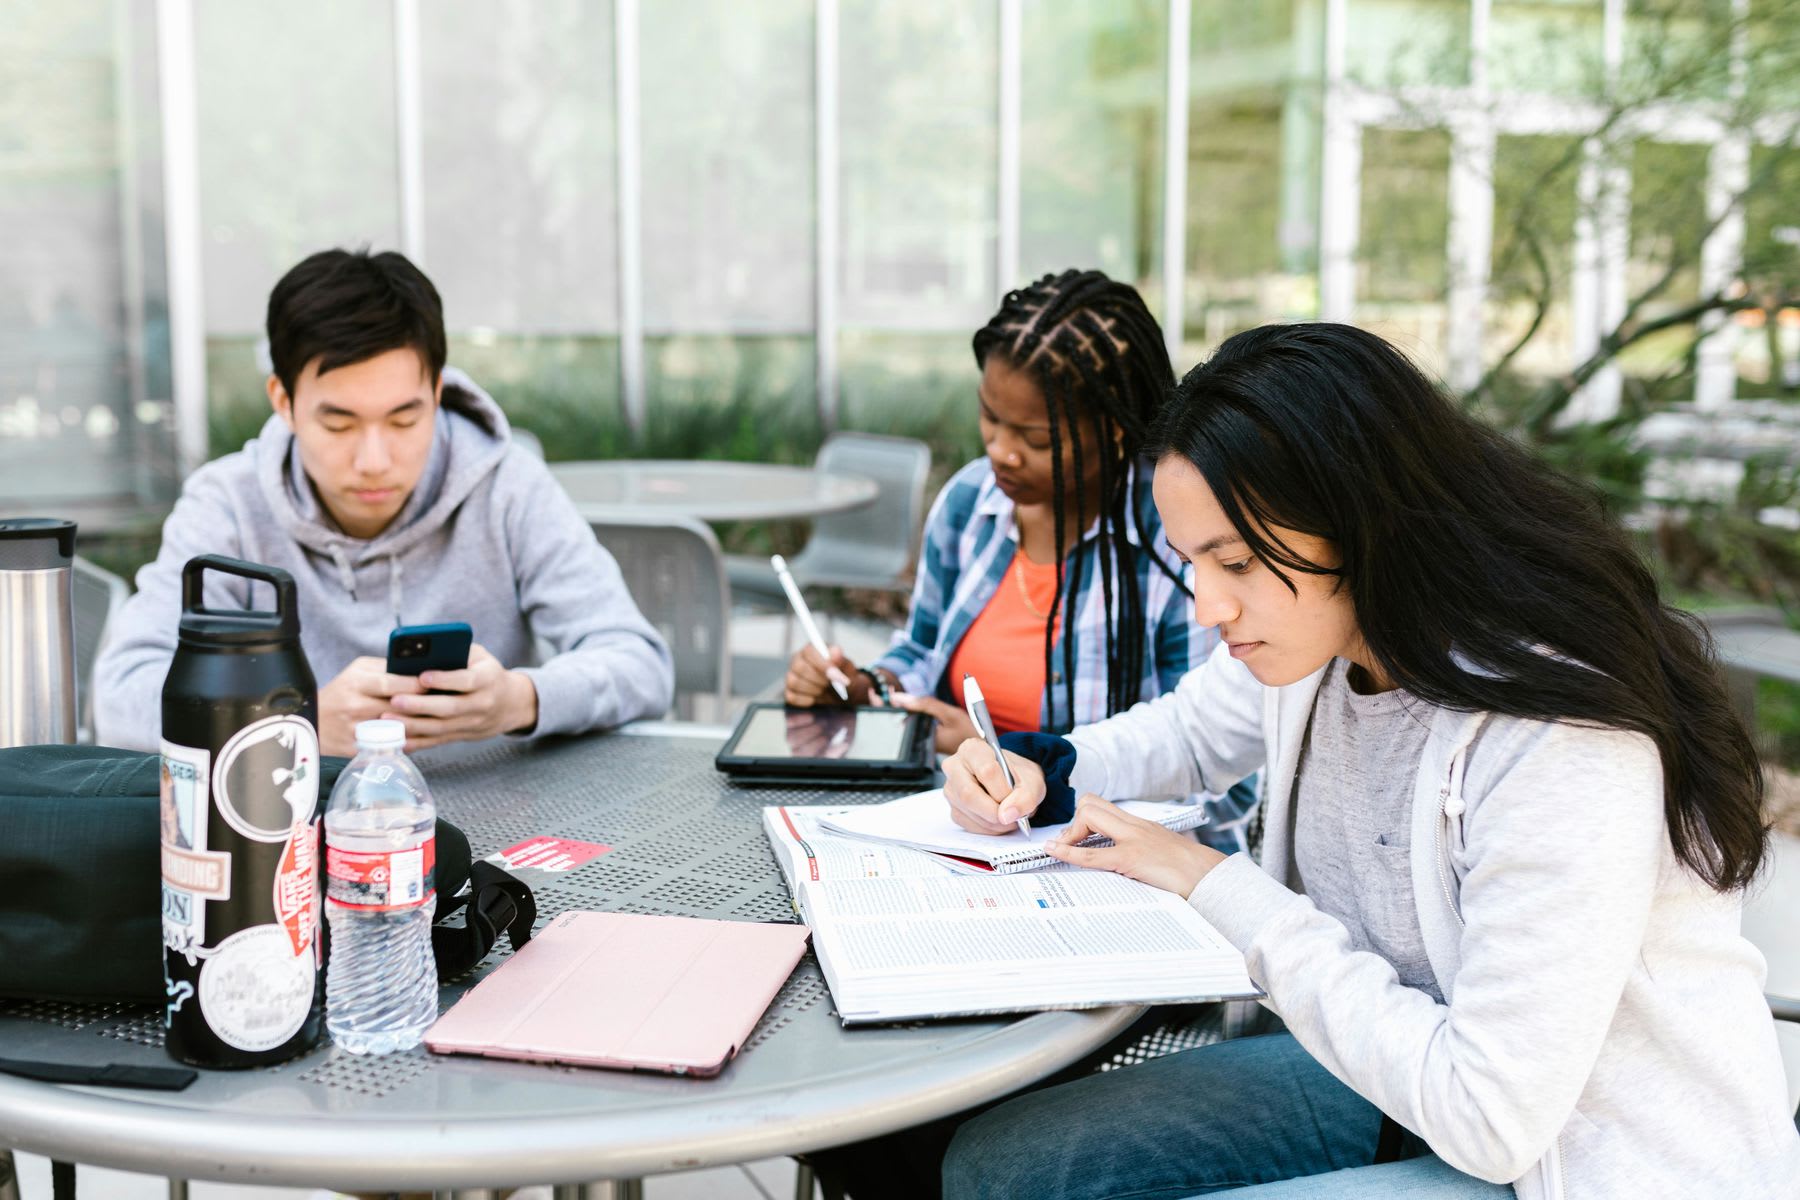 Students sitting on a table outdoors while studying